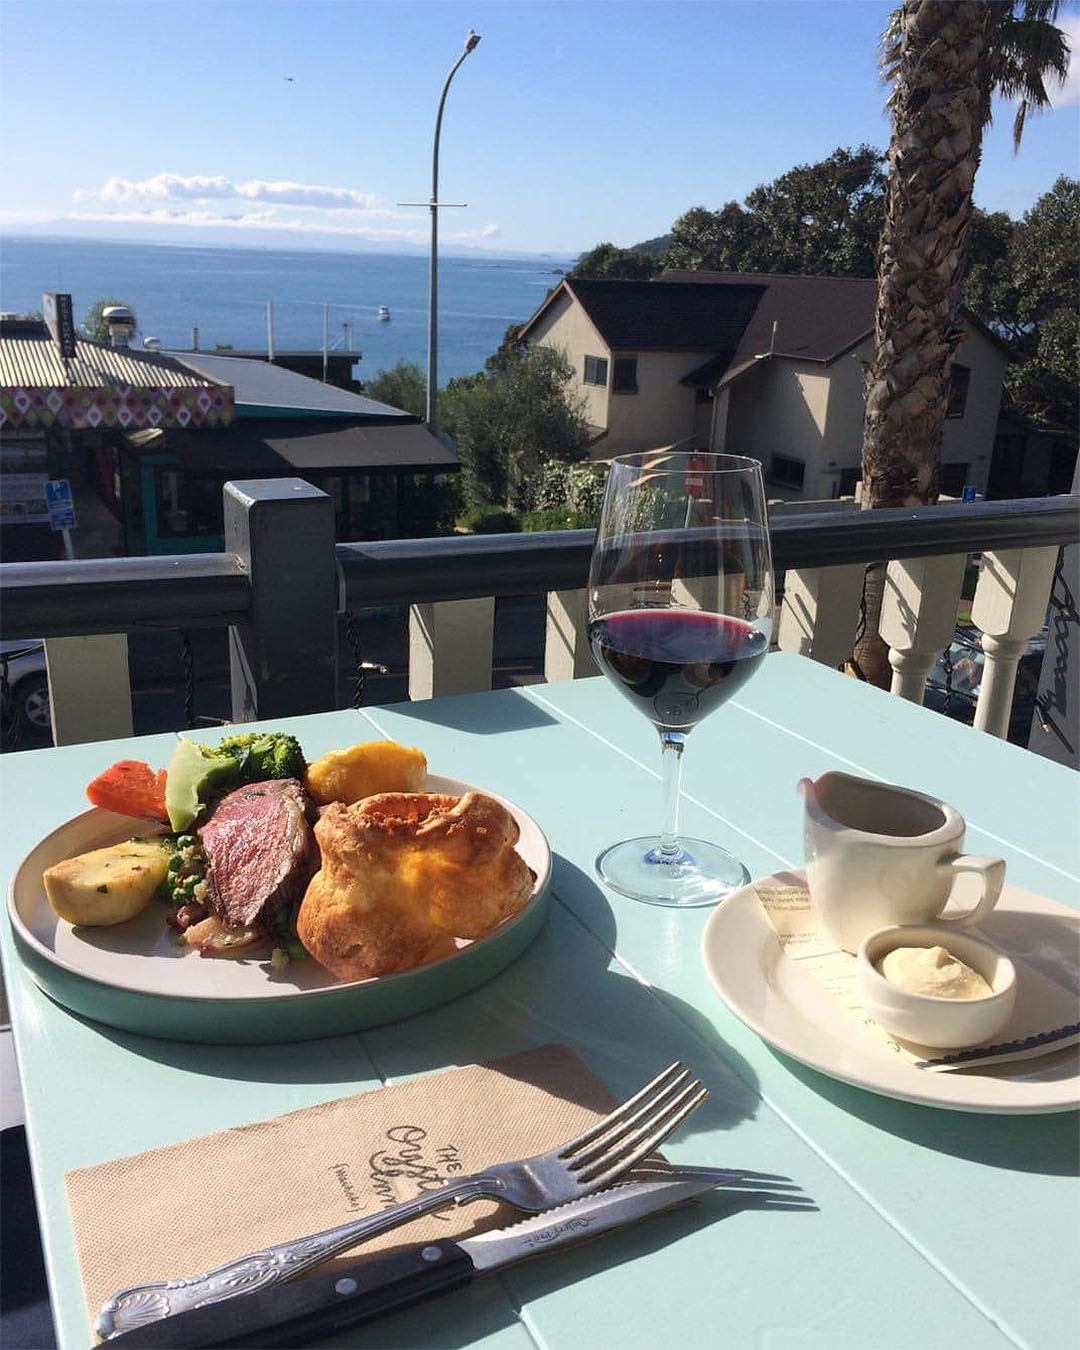 Oyster Inn's roast sits on a table overlooking the sea in Waiheke, one of Auckland's best roasts.